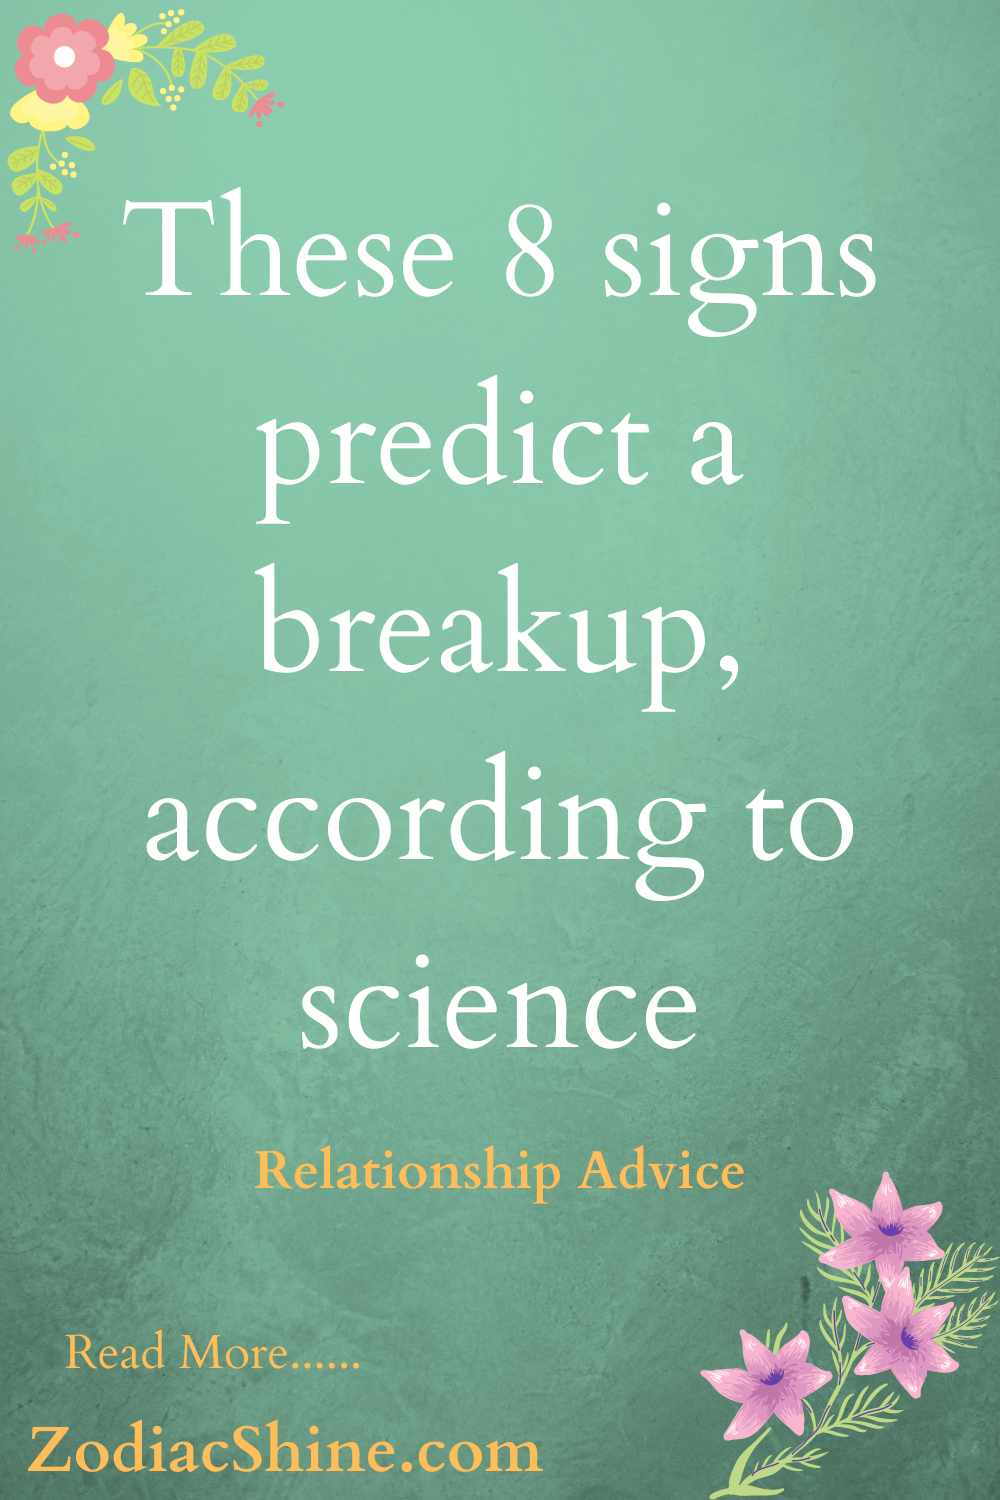 These 8 signs predict a breakup, according to science